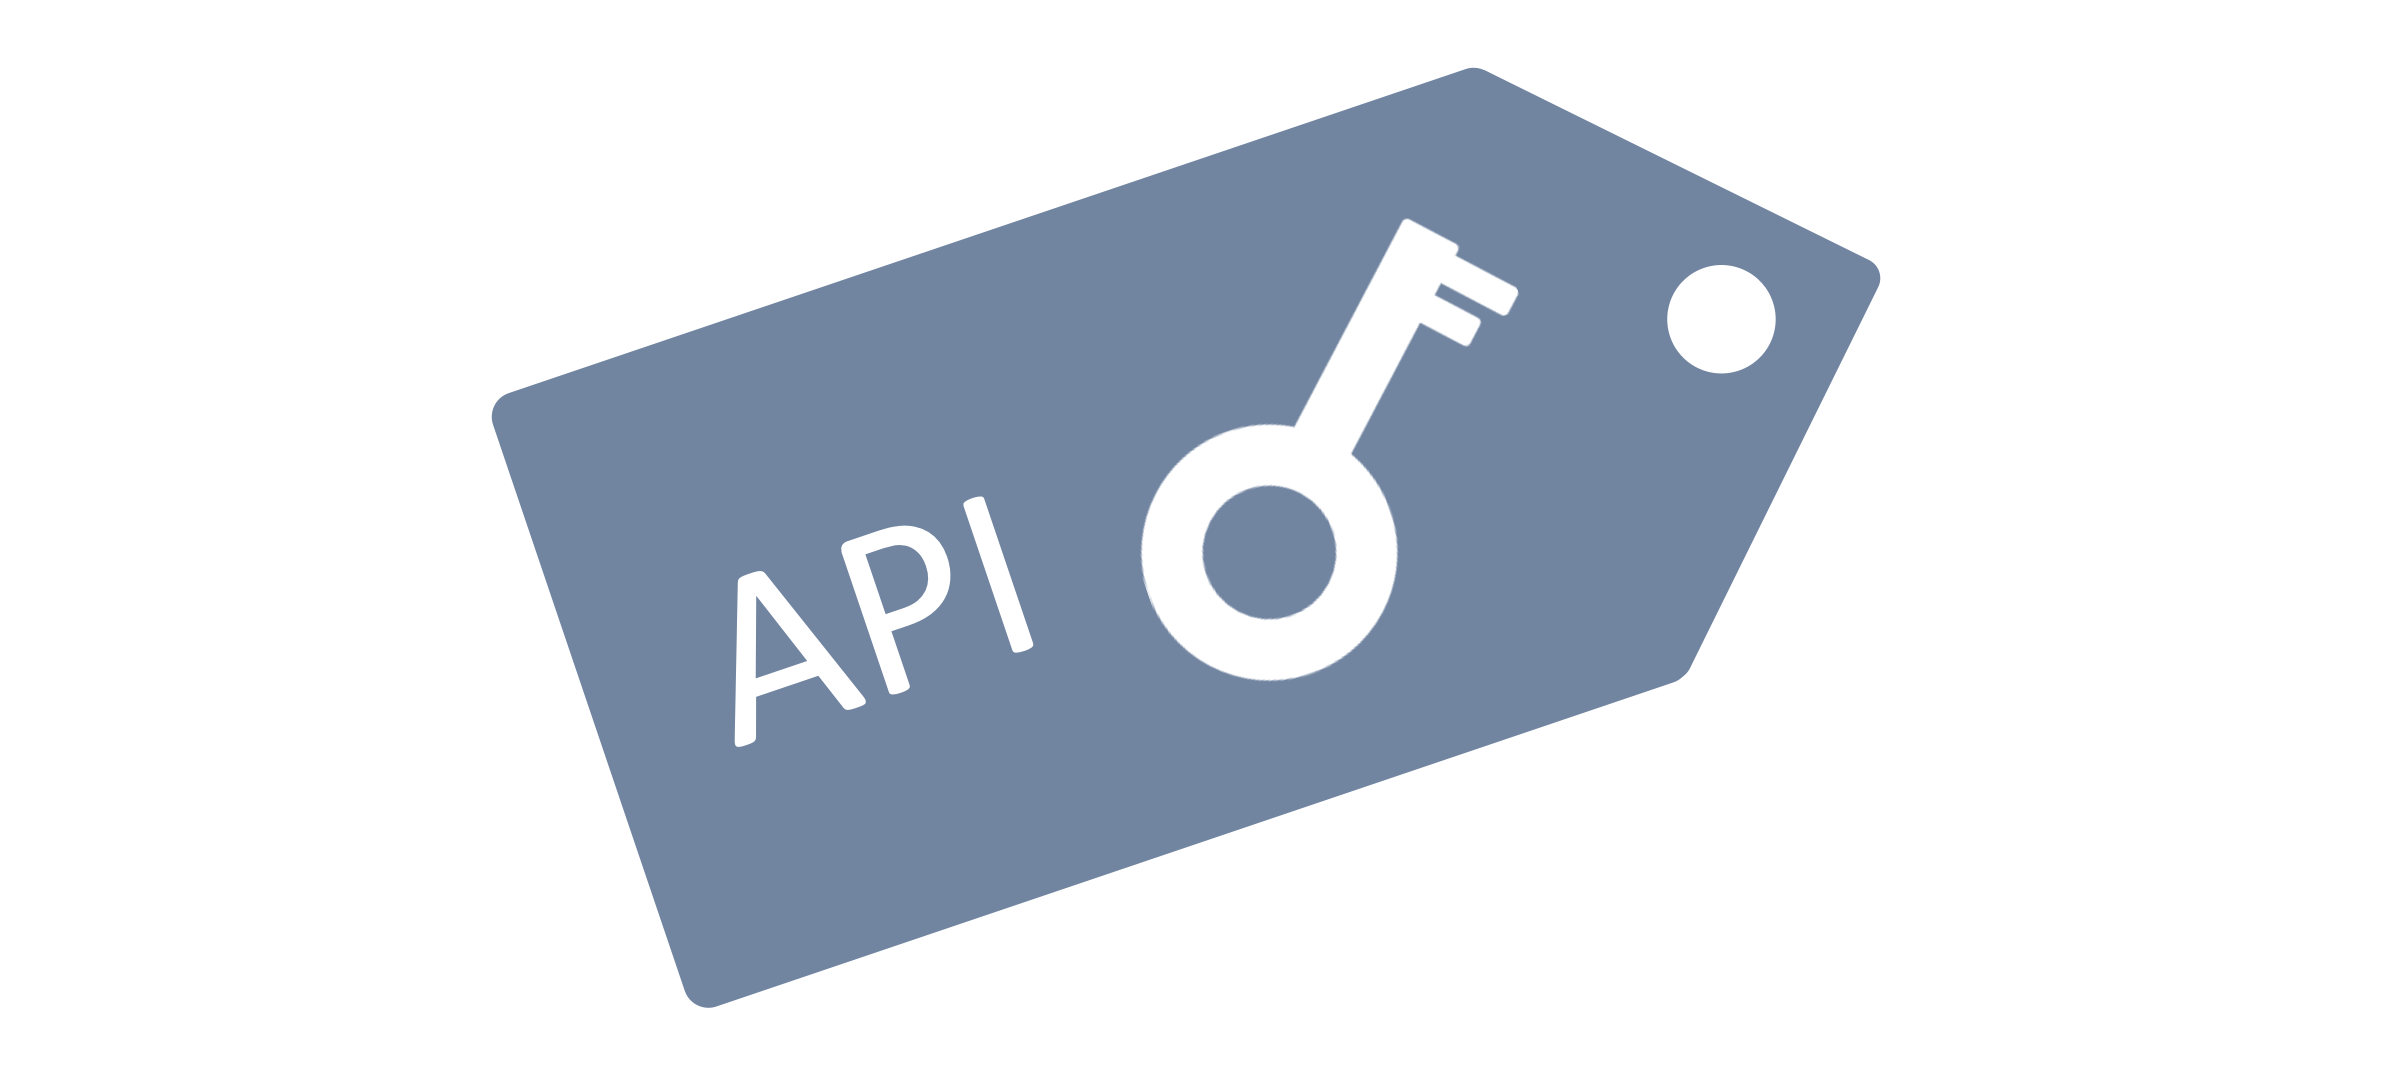 Flat illustration of a price tag containing a key and the letters API 